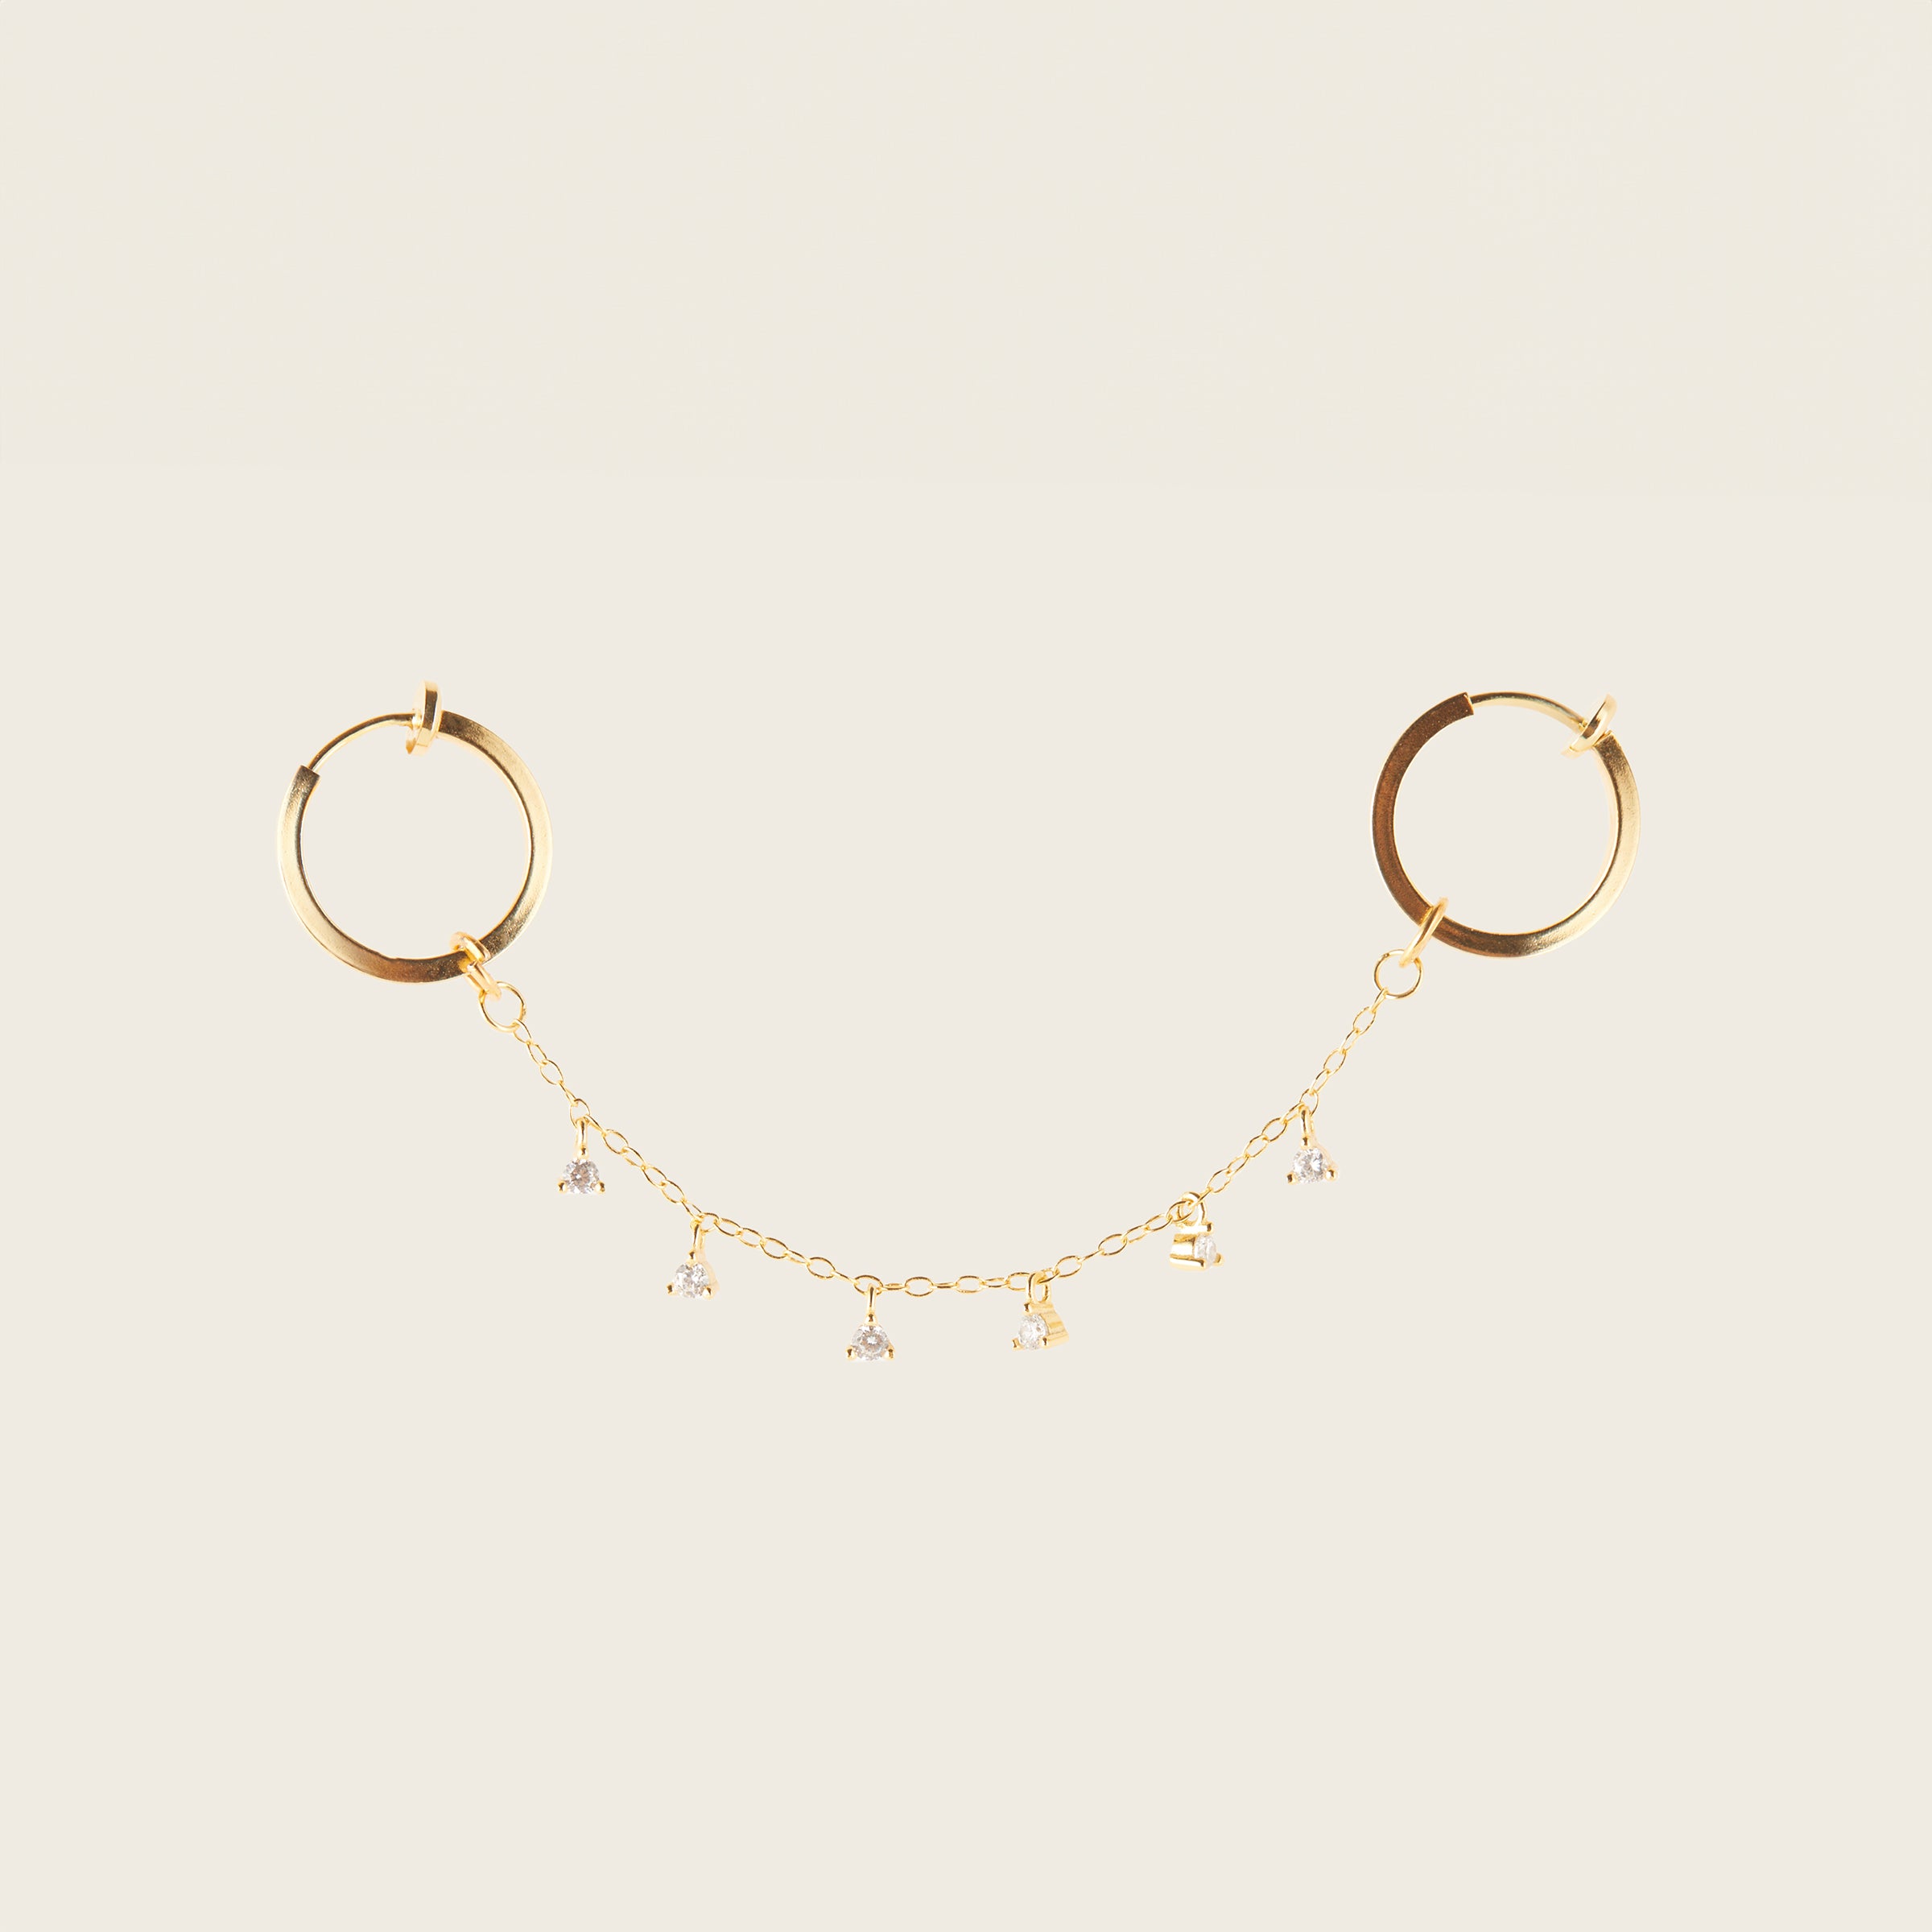 Image of the Single Triangle Charm Hoop Chain are made with high-quality materials, including 18K gold plating over 925 Sterling Silver. These charms are both non-tarnish and water resistant. The perfect combination of style and durability.